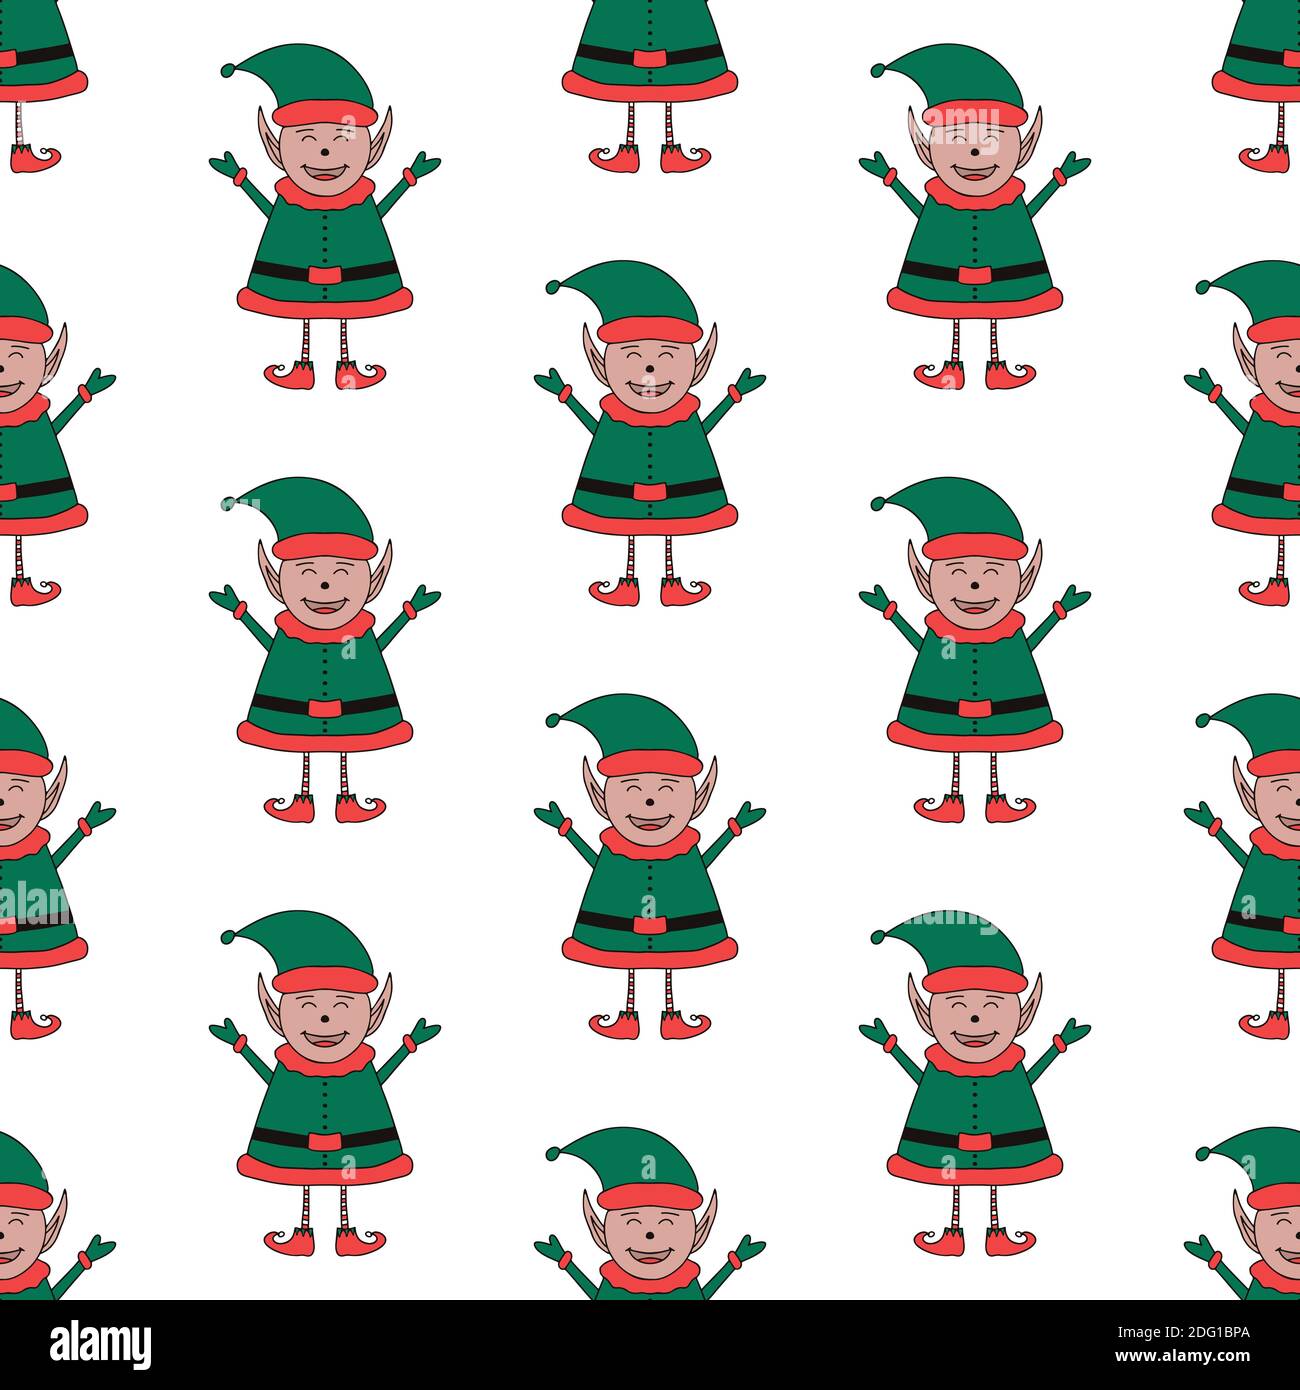 Christmas seamless pattern made from Elf character on a white background. Stock Vector